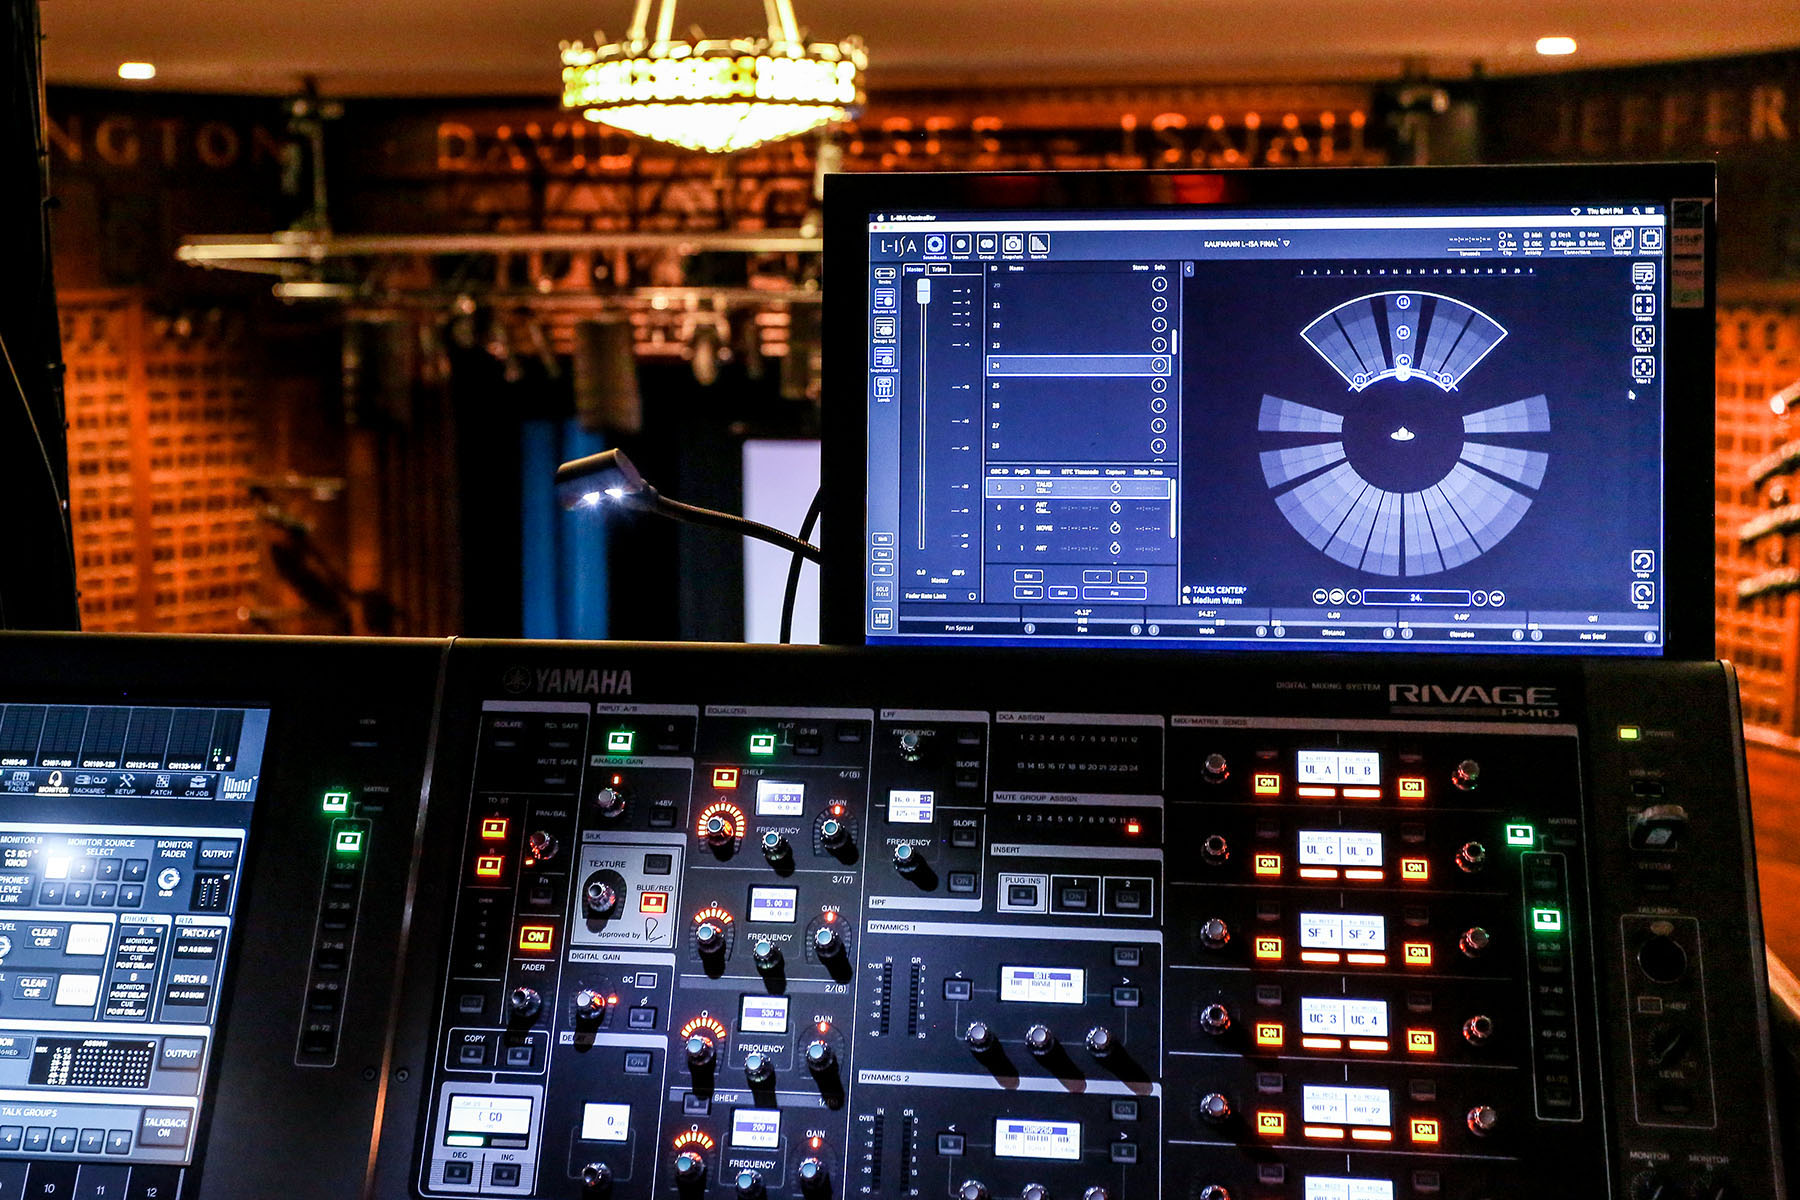 Sound system set up by L-Acoustics at the Kaufmann Concert Hall, New York